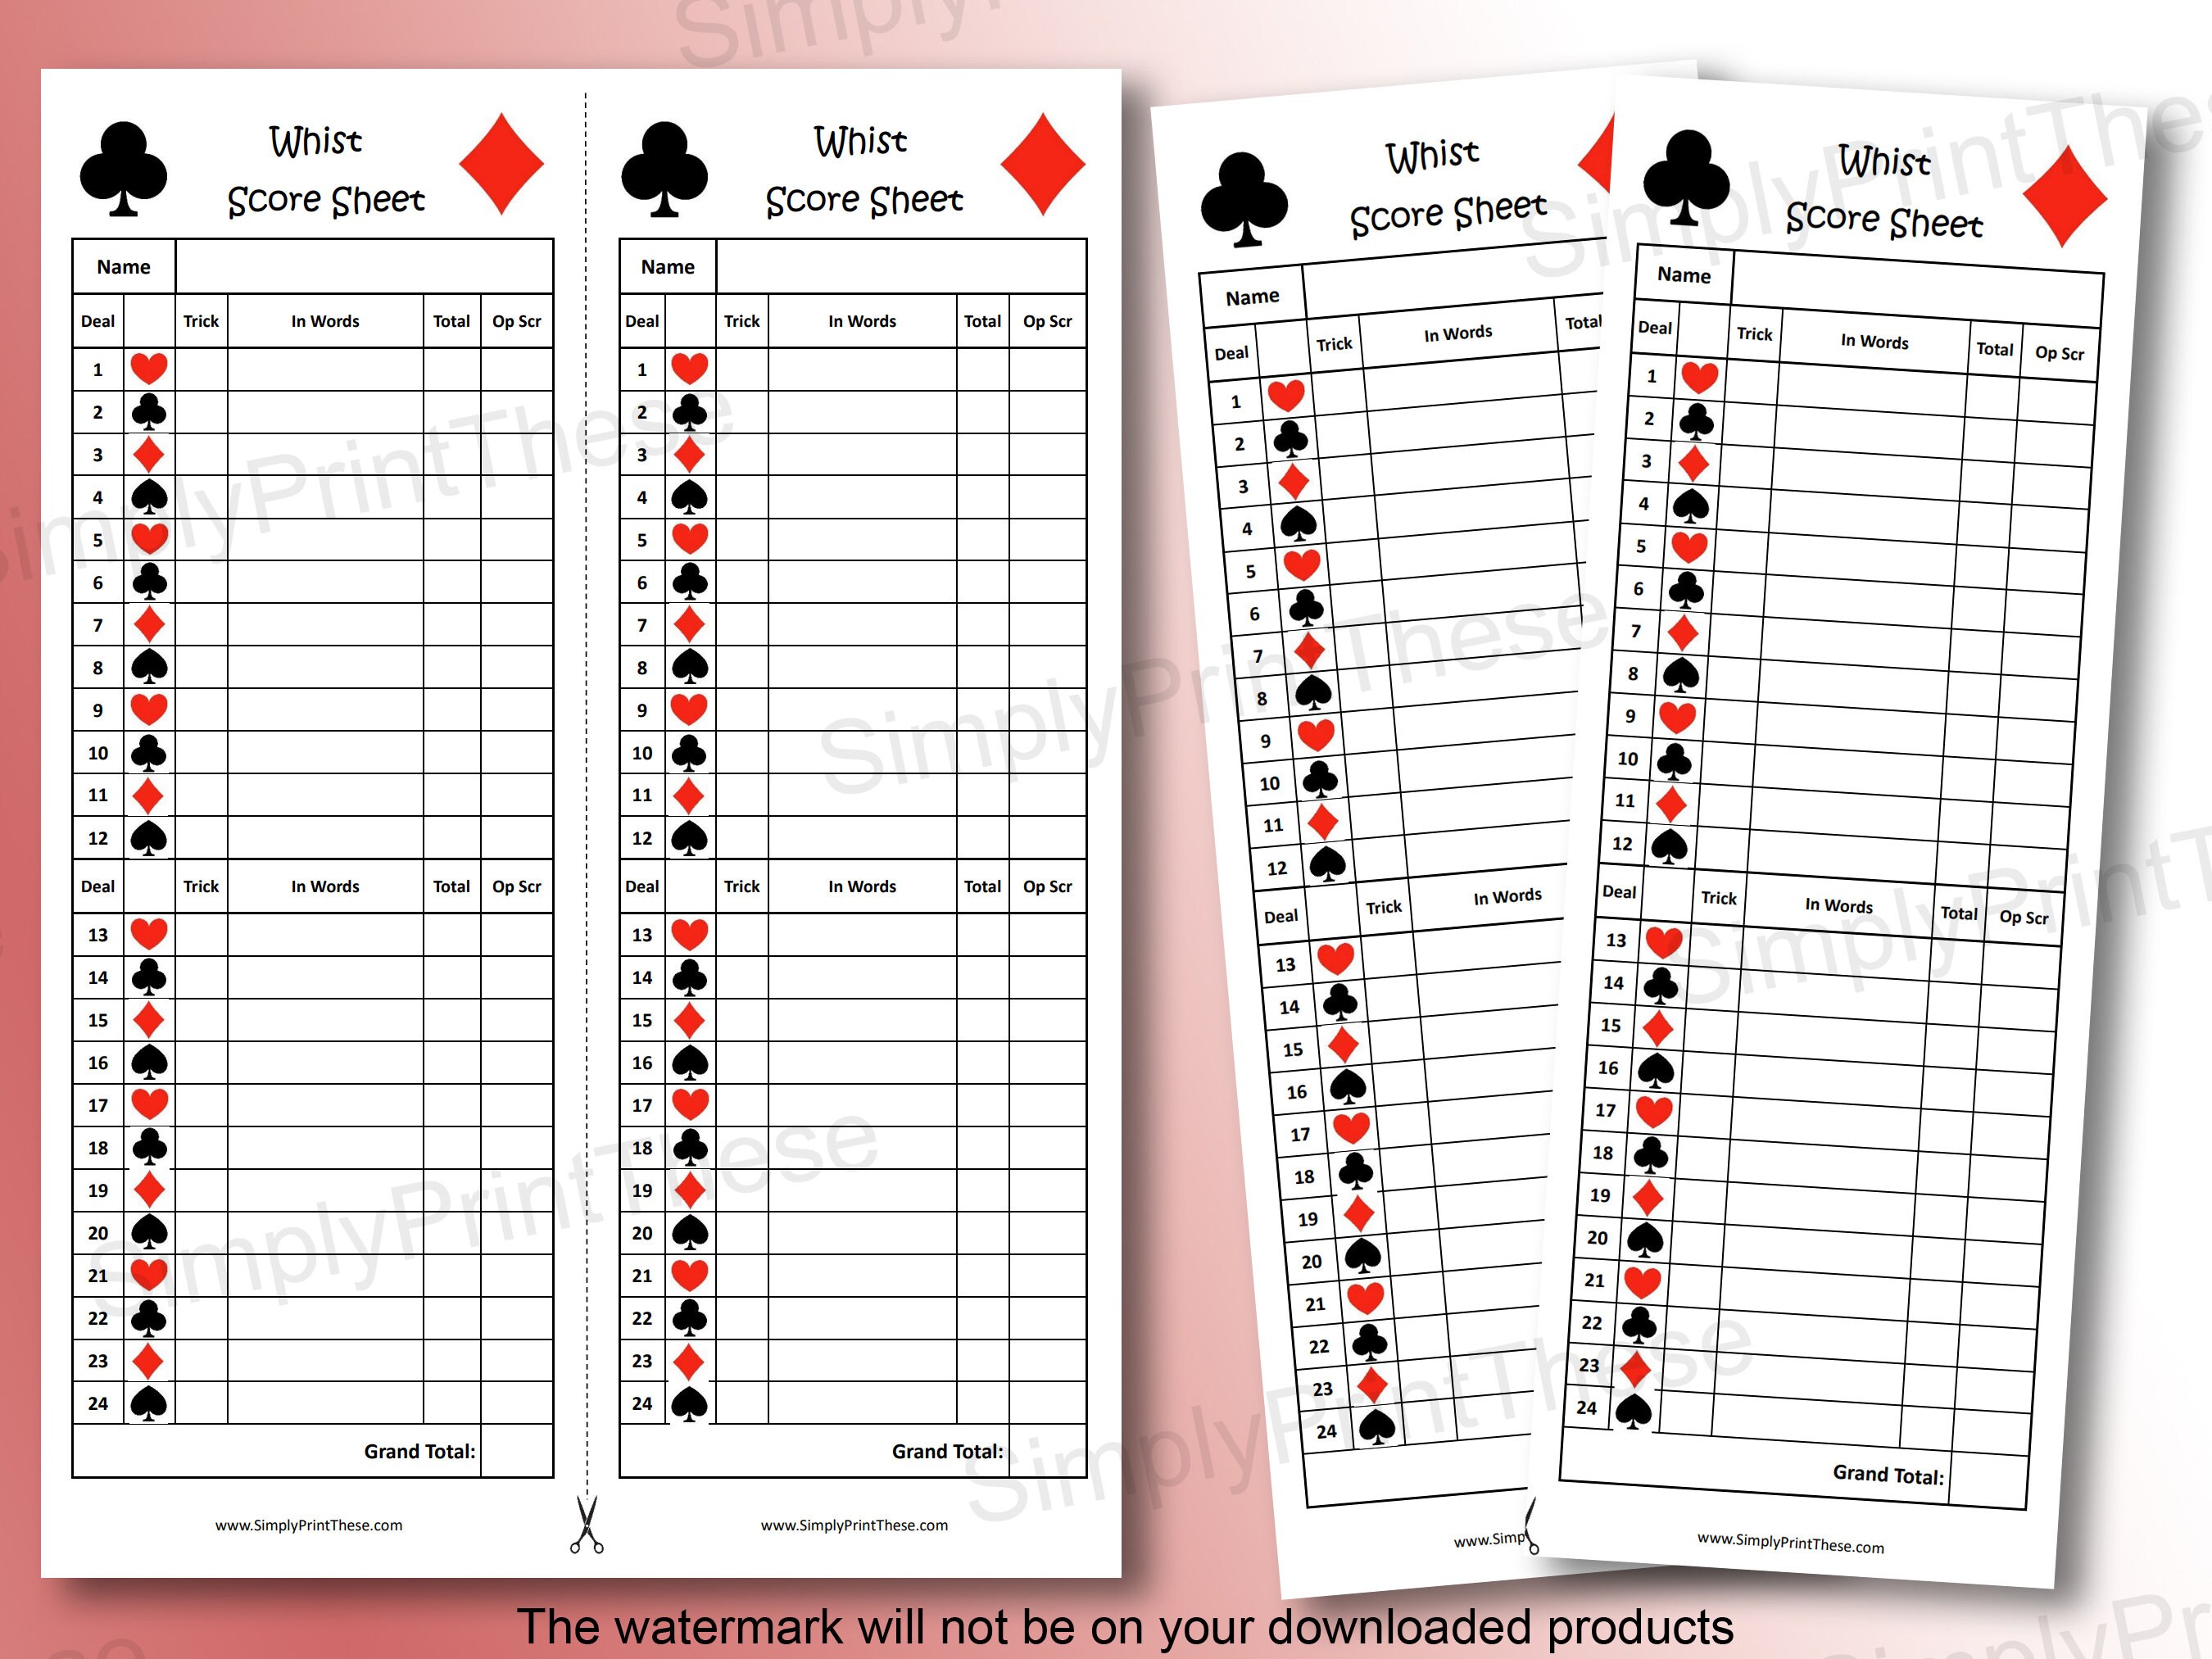 Printable Whist Score Sheets To Record Your Whist Card Games Whist Score Card Learn To Play